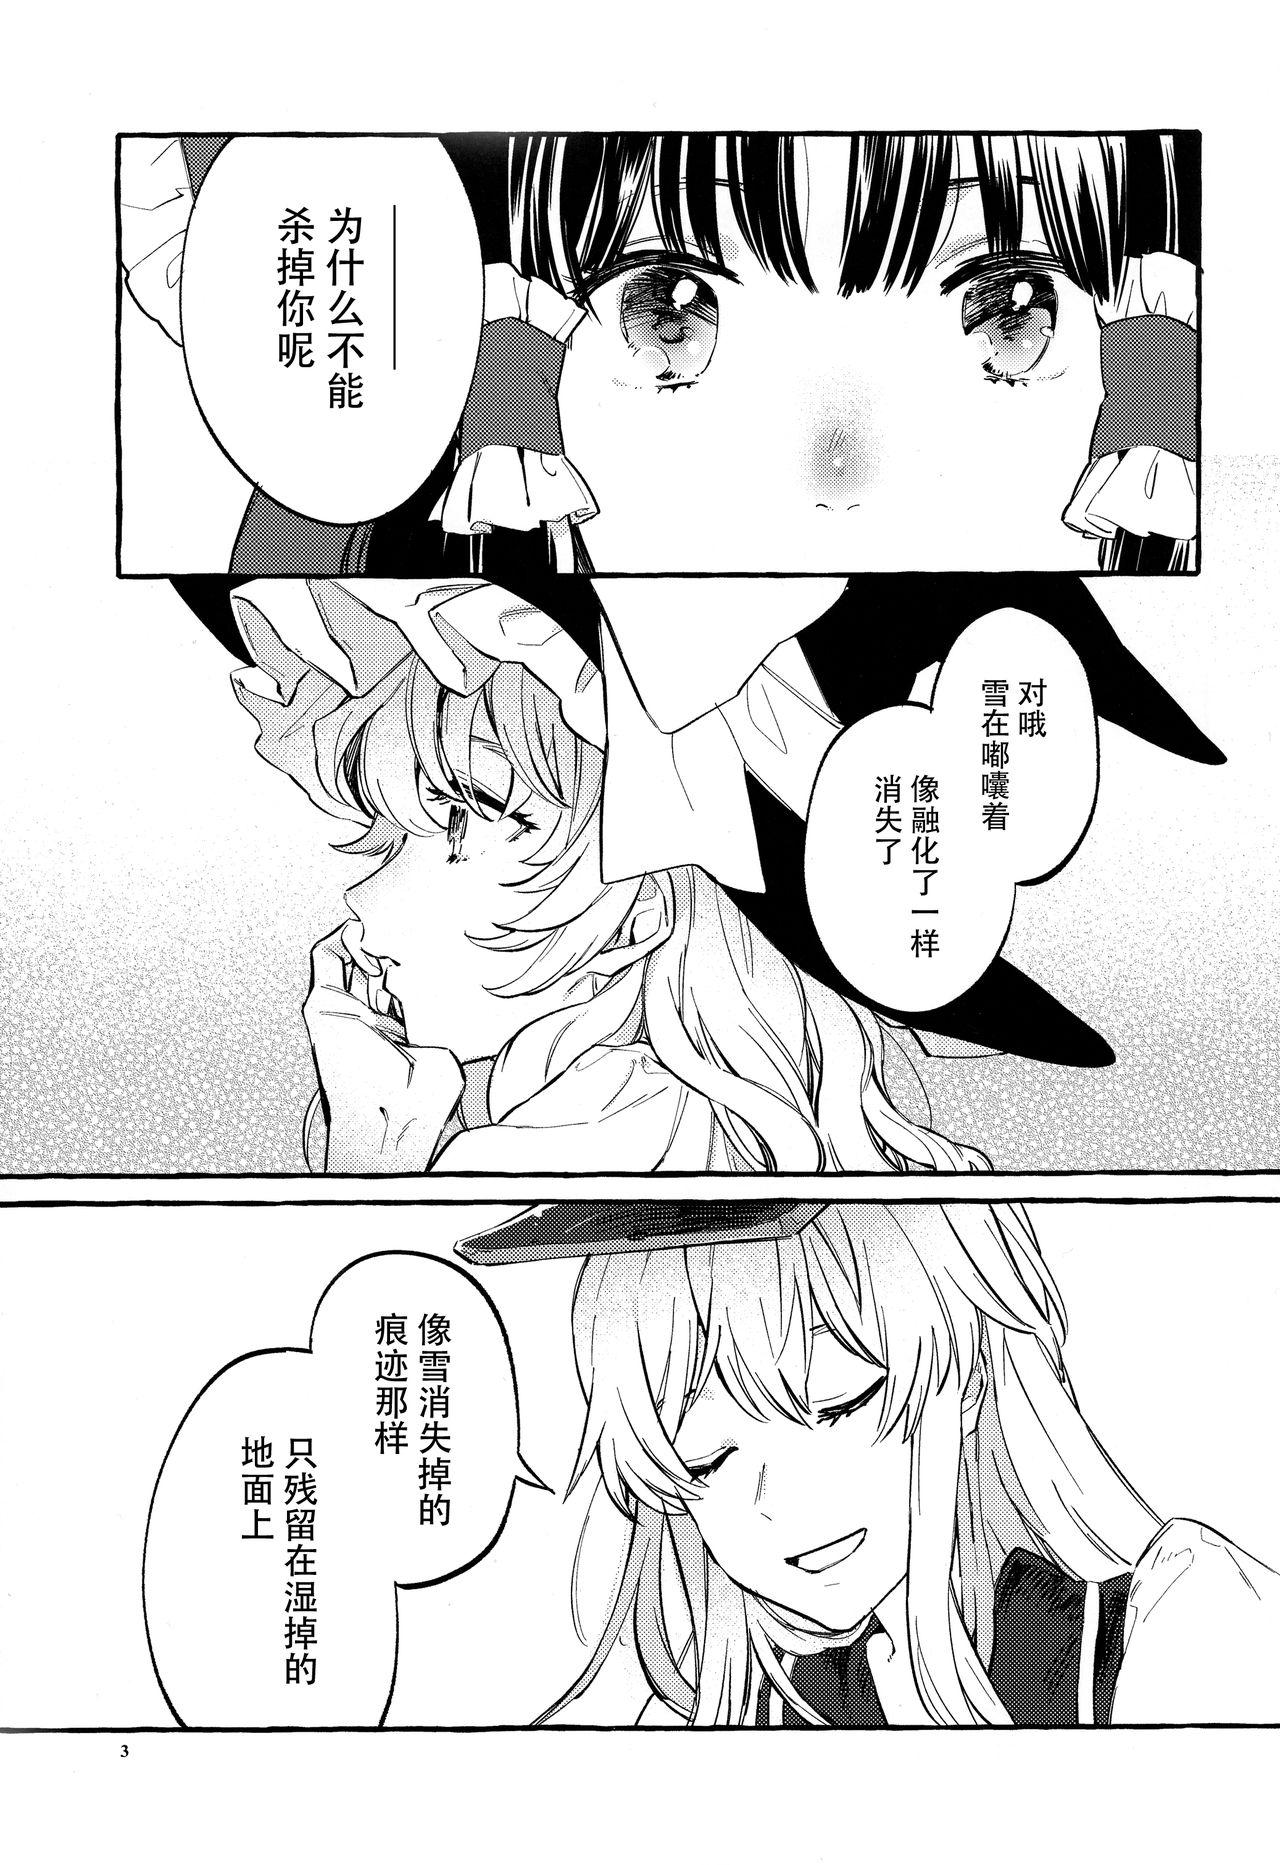 Pounding Happy End Standard - Touhou project Masterbation - Page 2